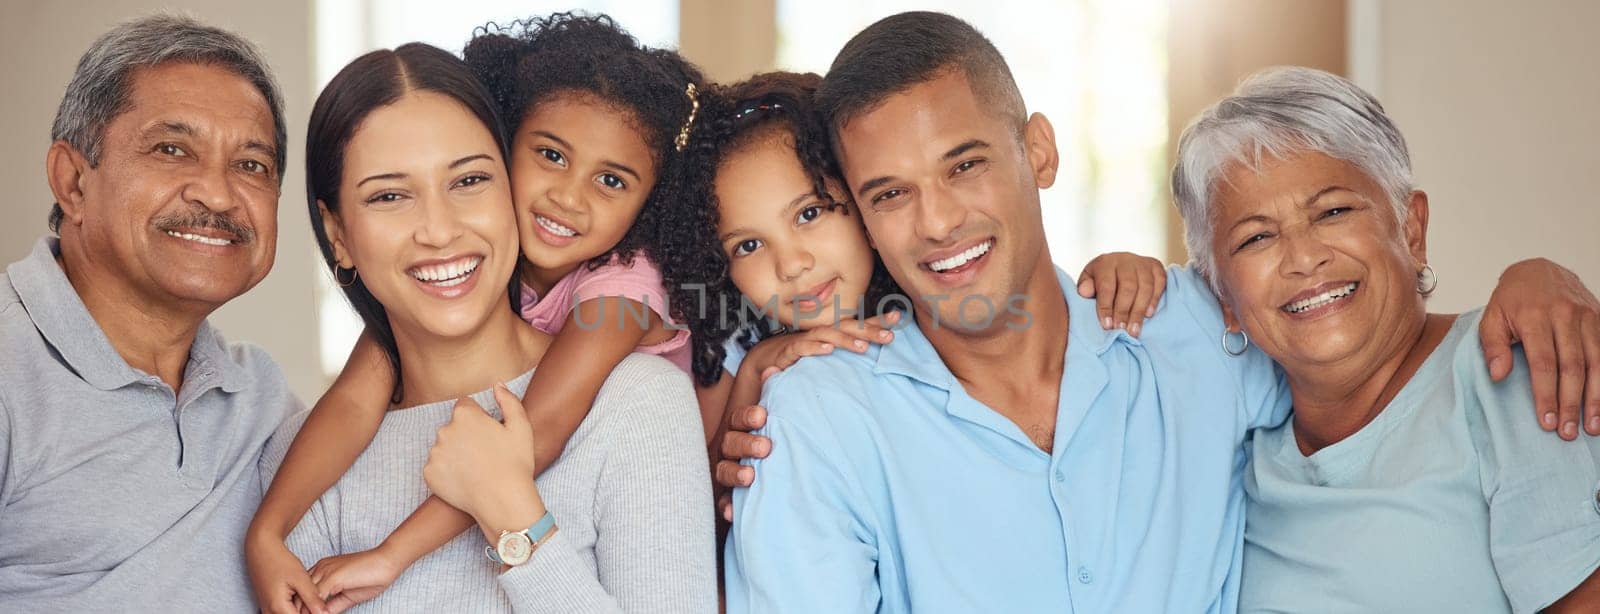 Happy big family, portrait smile and face of men, women with children in happiness at home. Mother, father and kids with grandparents smiling and relaxing together for fun, break or holiday indoors.